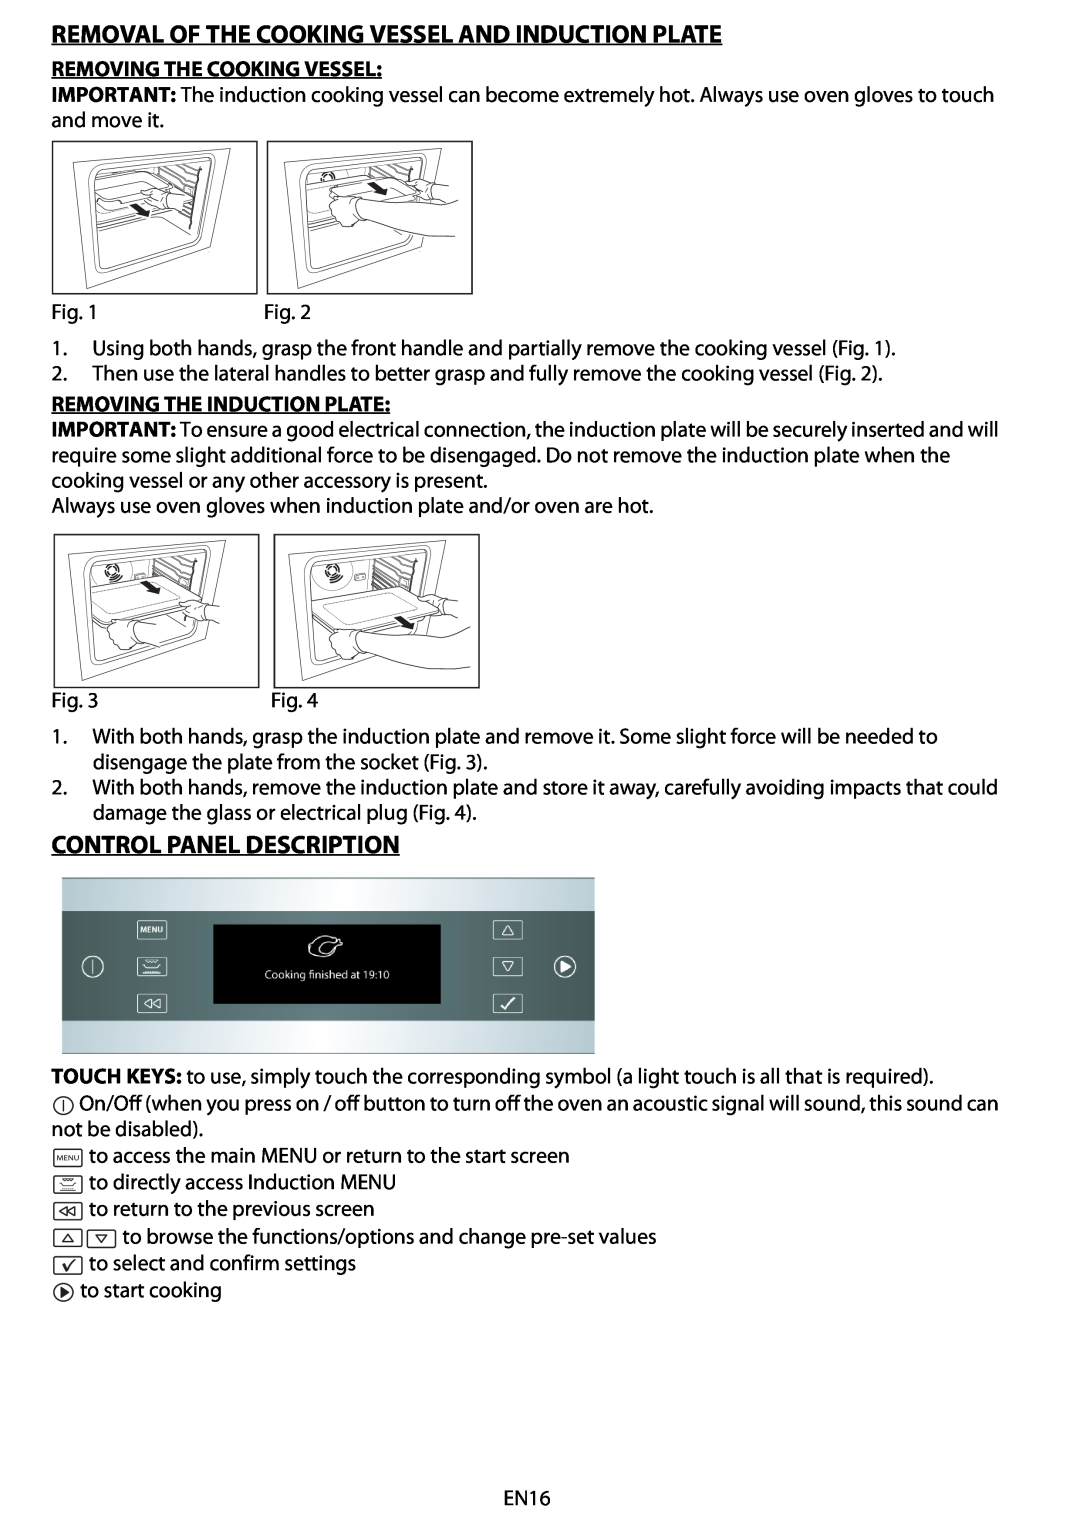 Whirlpool 8910 Removal Of The Cooking Vessel And Induction Plate, Control Panel Description, Removing The Cooking Vessel 